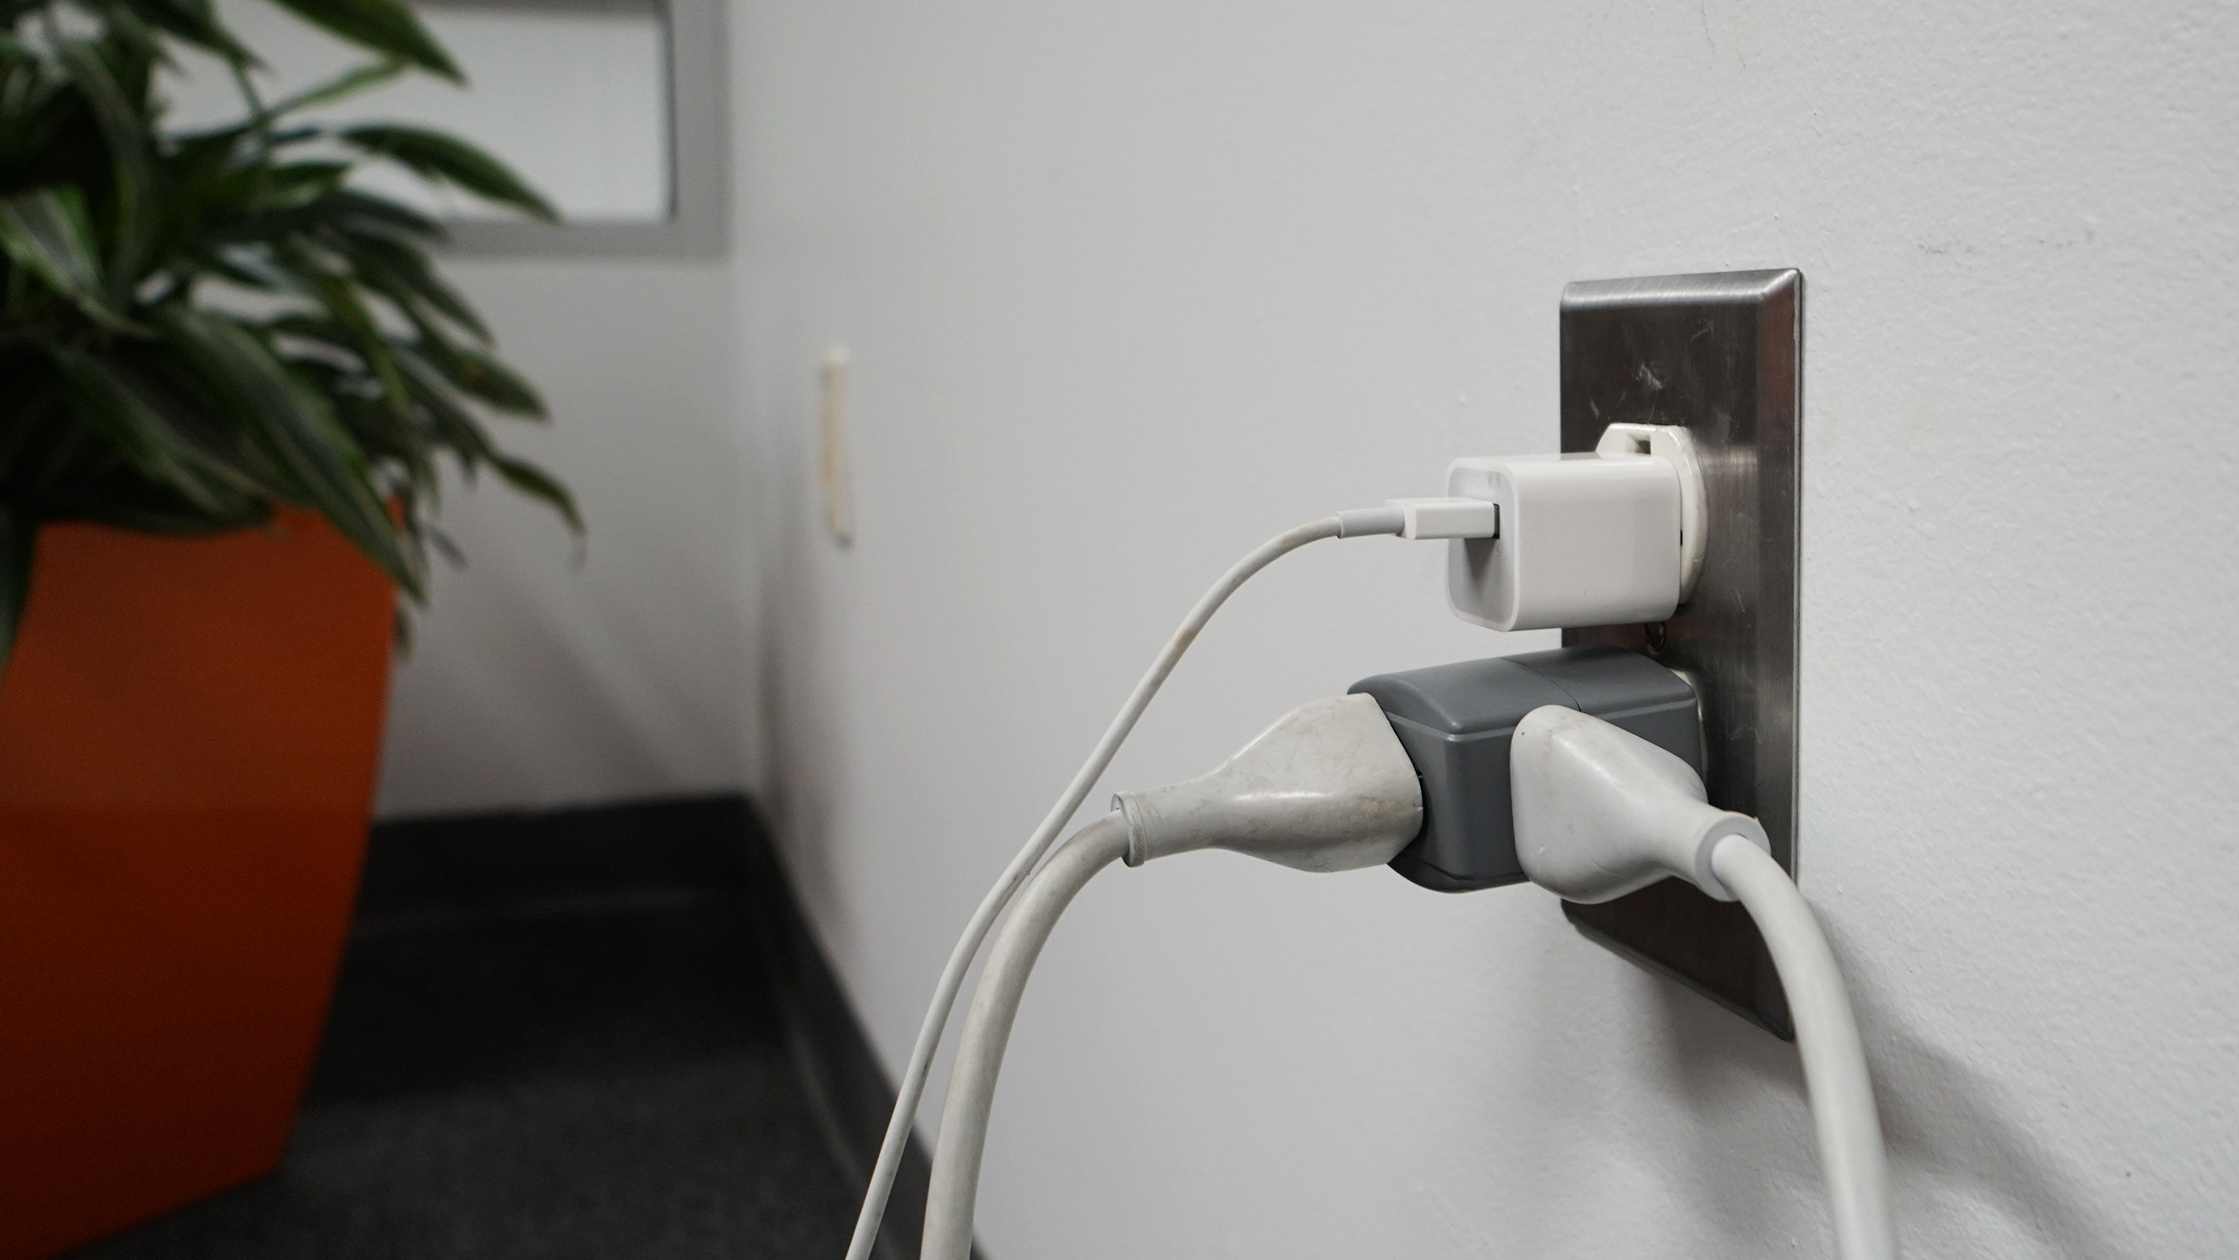 Outlet Splitter At Coworking Space